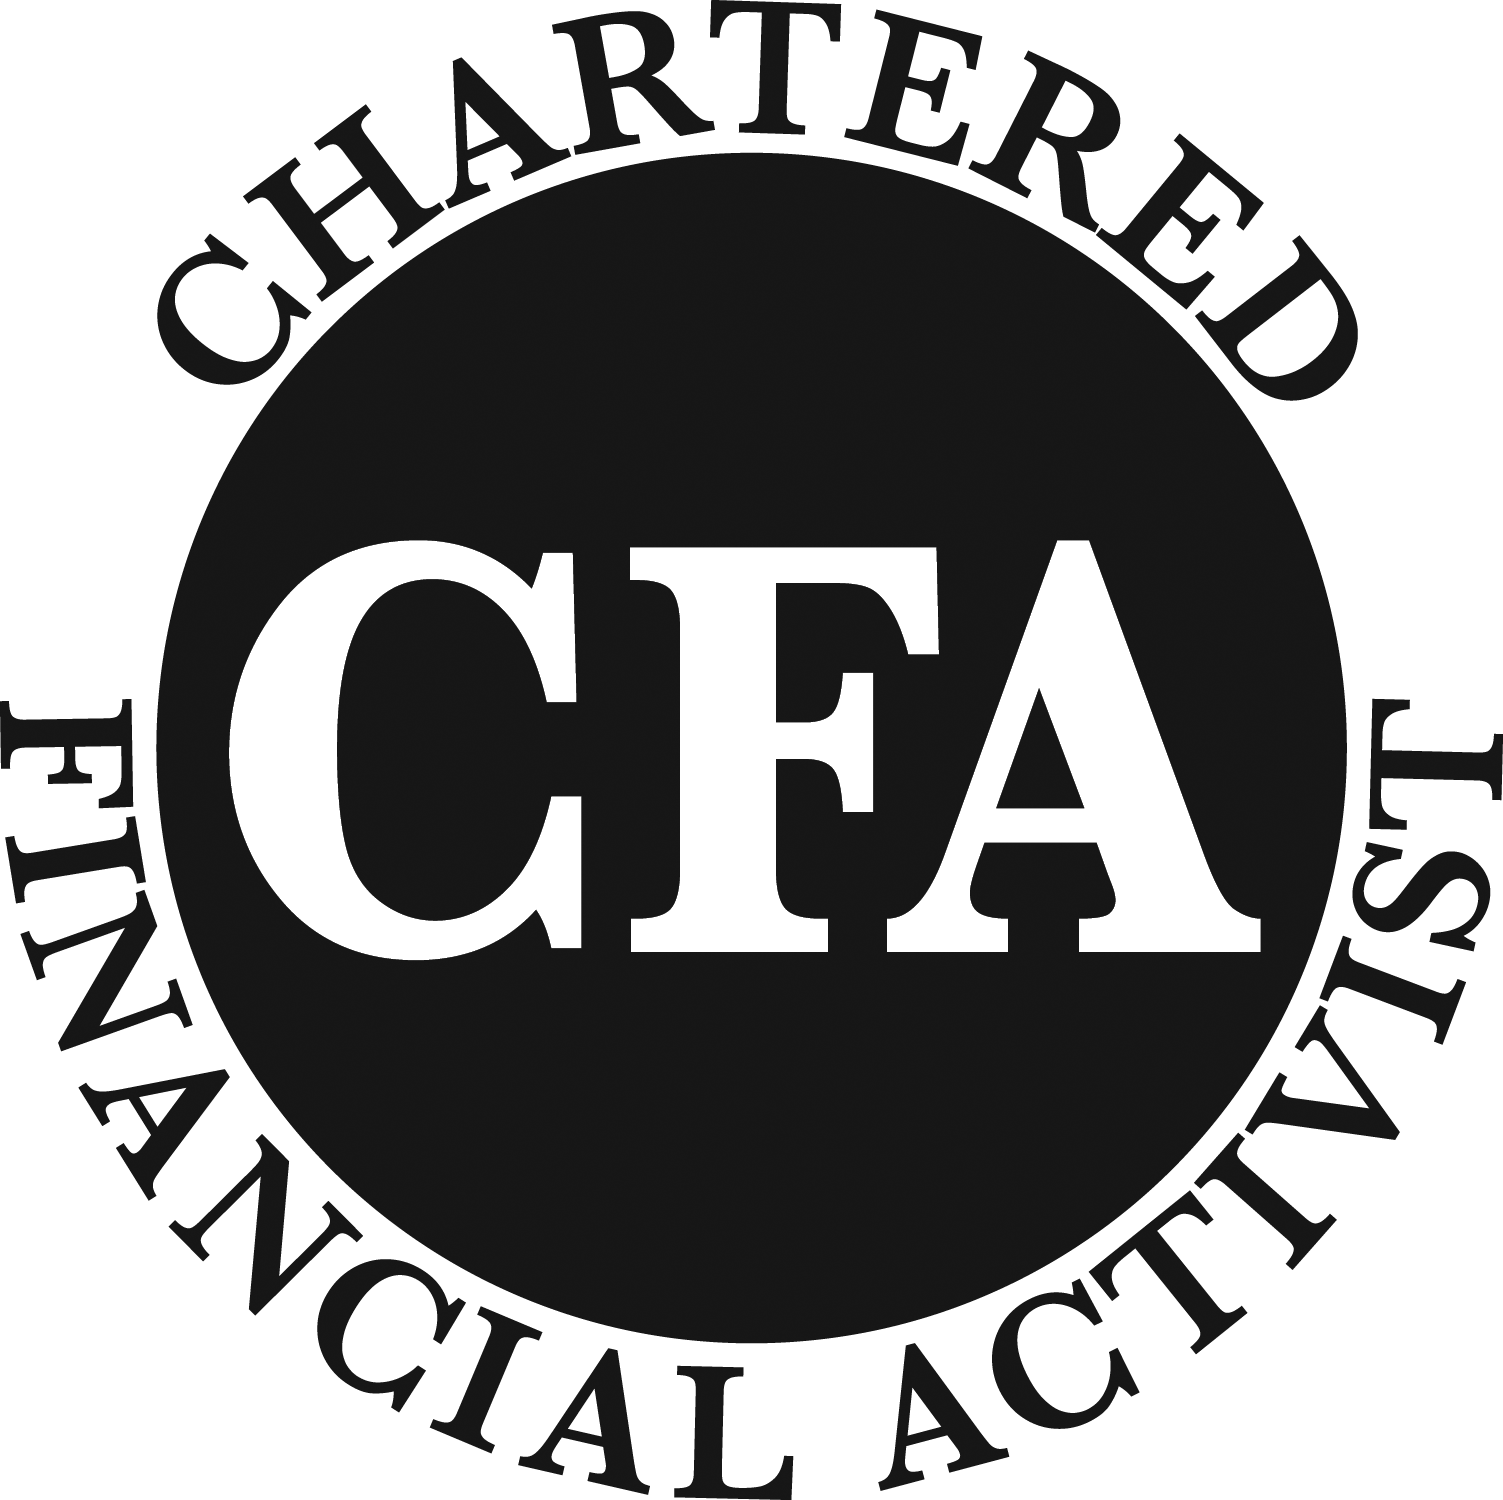 Chartered Financial Analyst Logo photo - 1